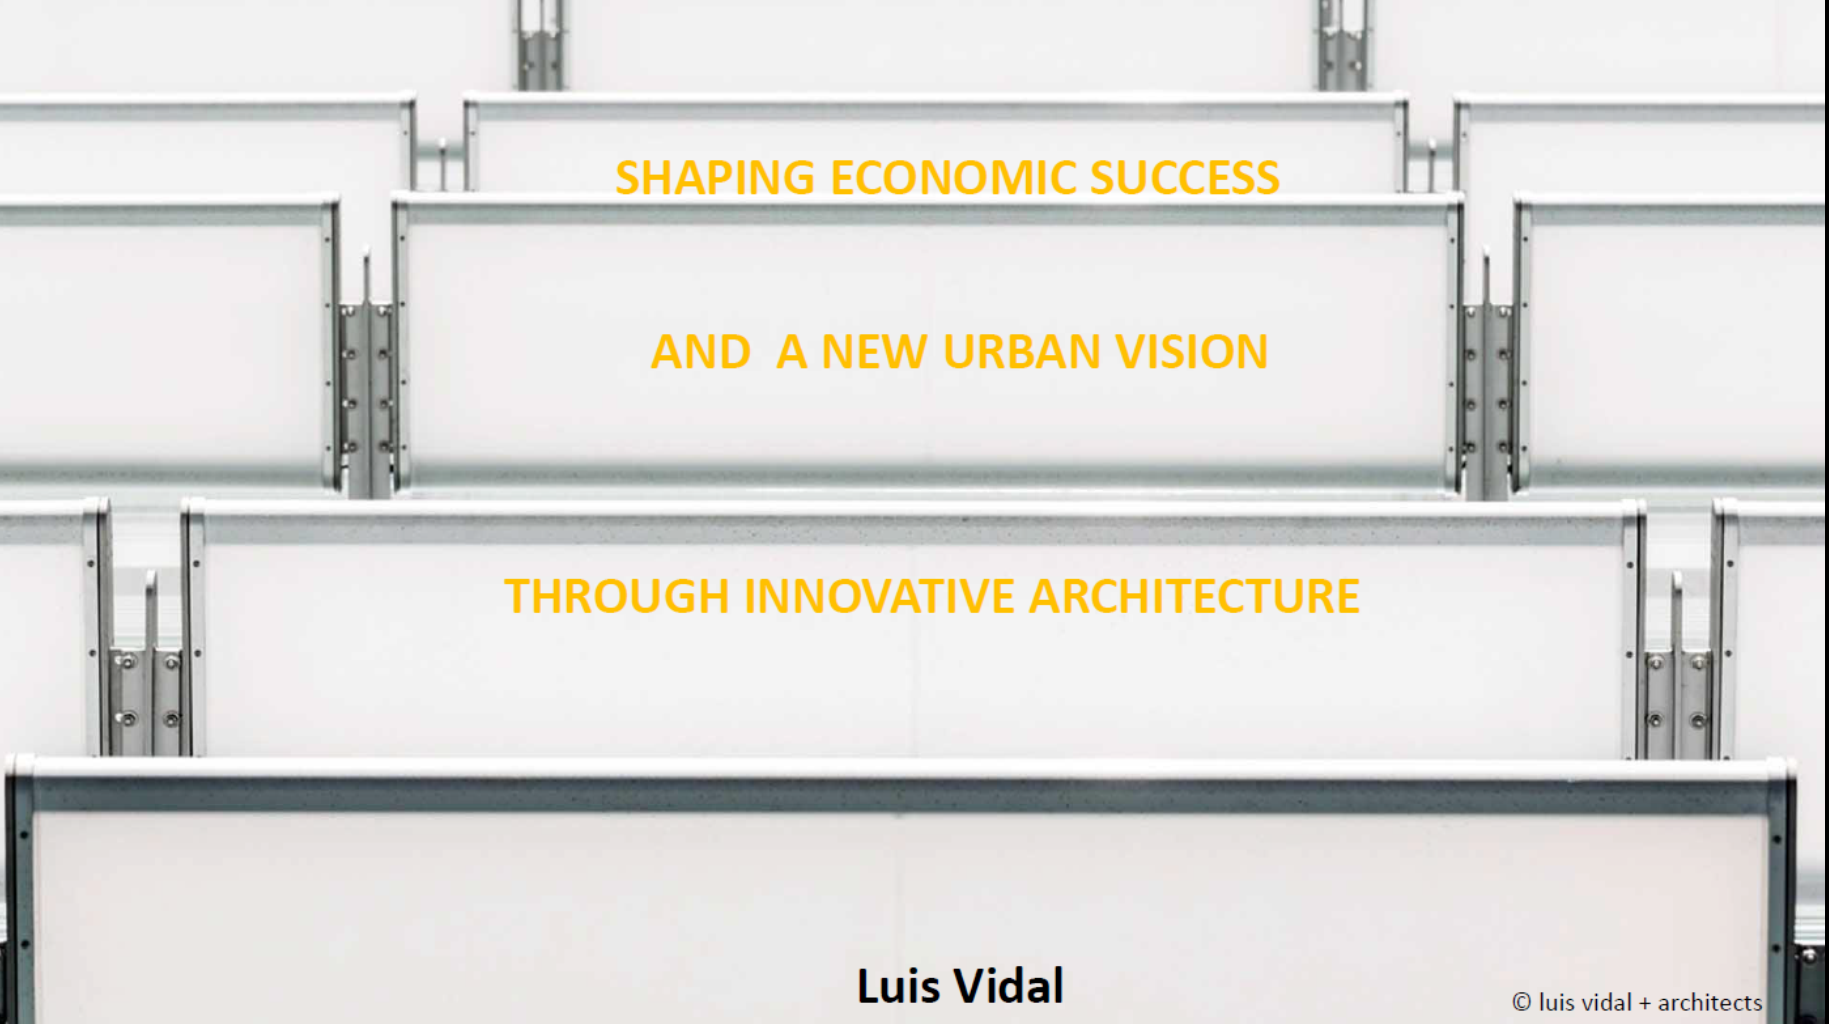 Presentation by Luis Vidal: Shaping Economic Success and a New Urban Vision through Innovative Architecture